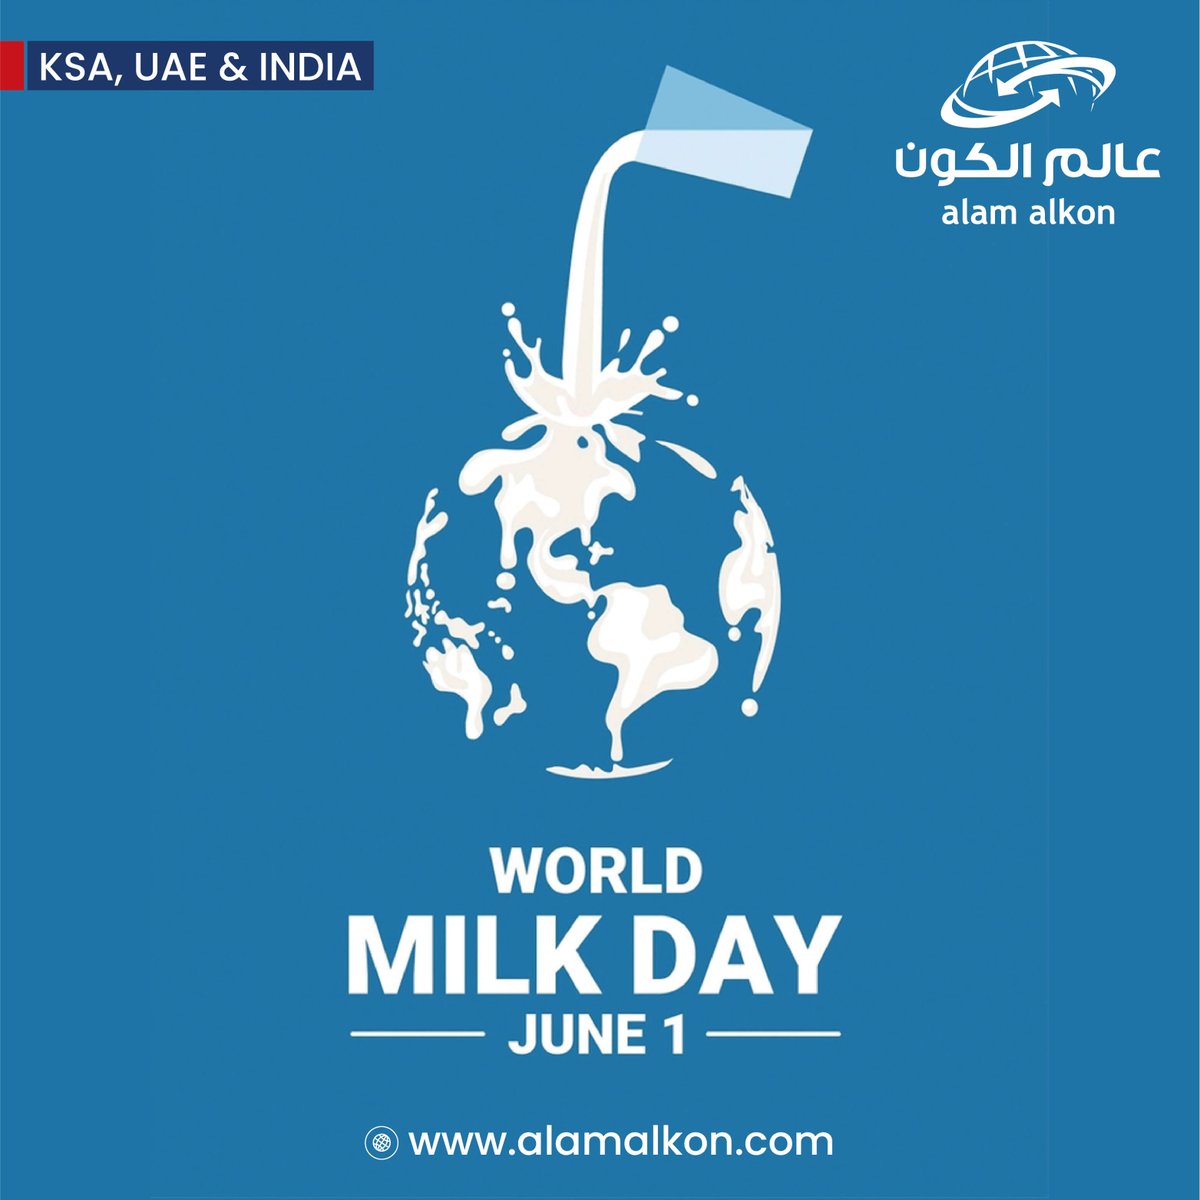 Raise a glass and celebrate World Milk Day with us! 📷📷 Today, we honor the incredible nutritional benefits and deliciousness of milk.  Share your favorite milk moments and tag us using #WorldMilkDay. Cheers to the power of milk! 📷📷 #MilkPower #CelebrateDairy